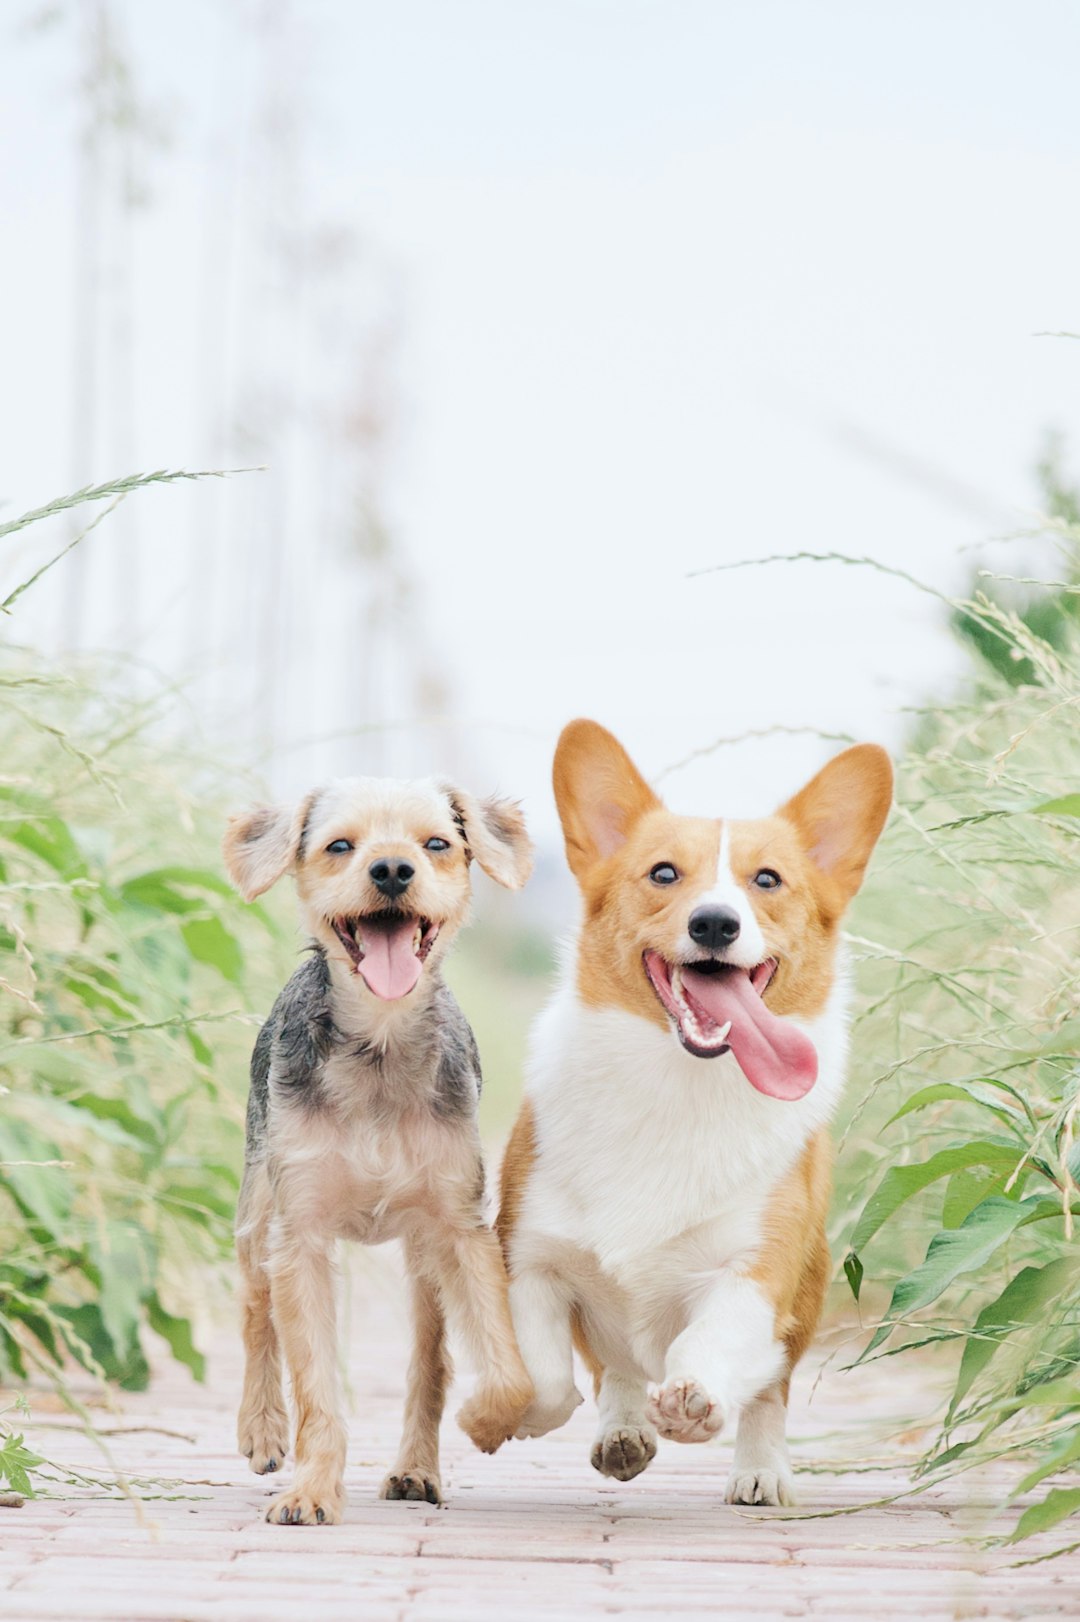 How You Can Train Your Dogs To Be More Obedient